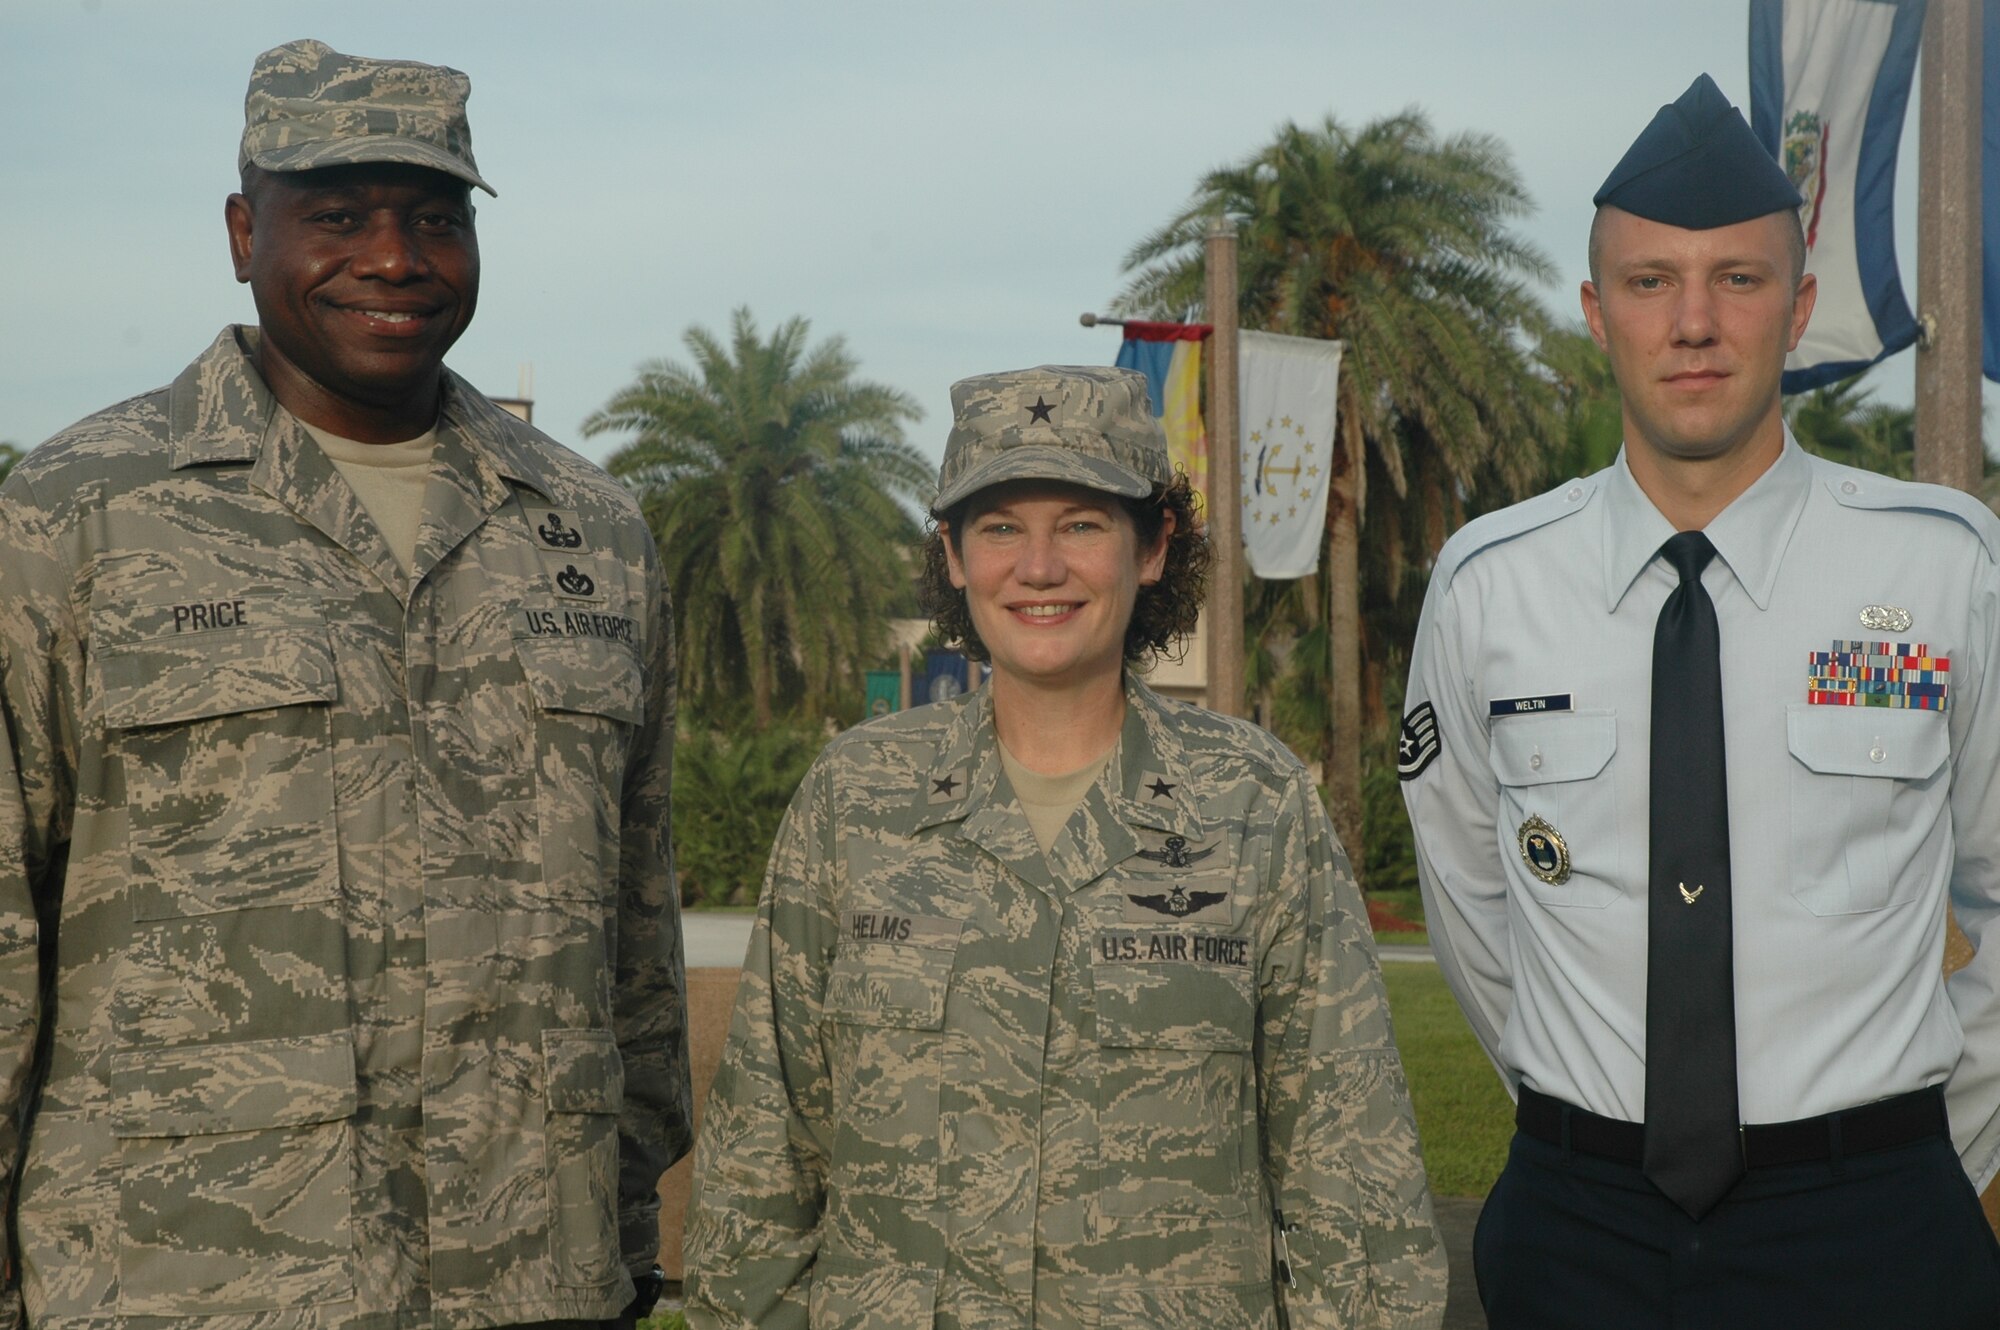 Two of the 12 Outstanding Airmen of the Year, Master Sgt. George Price (left) of the 45th Civil Engineer Squadron and Staff Sgt. James Weltin of the 333rd Recruiting Squadron, share a photo with 45th Space Wing Commander Brig. Gen. Susan Helms July 10. (U.S. Air Force photo by Chris Calkins)